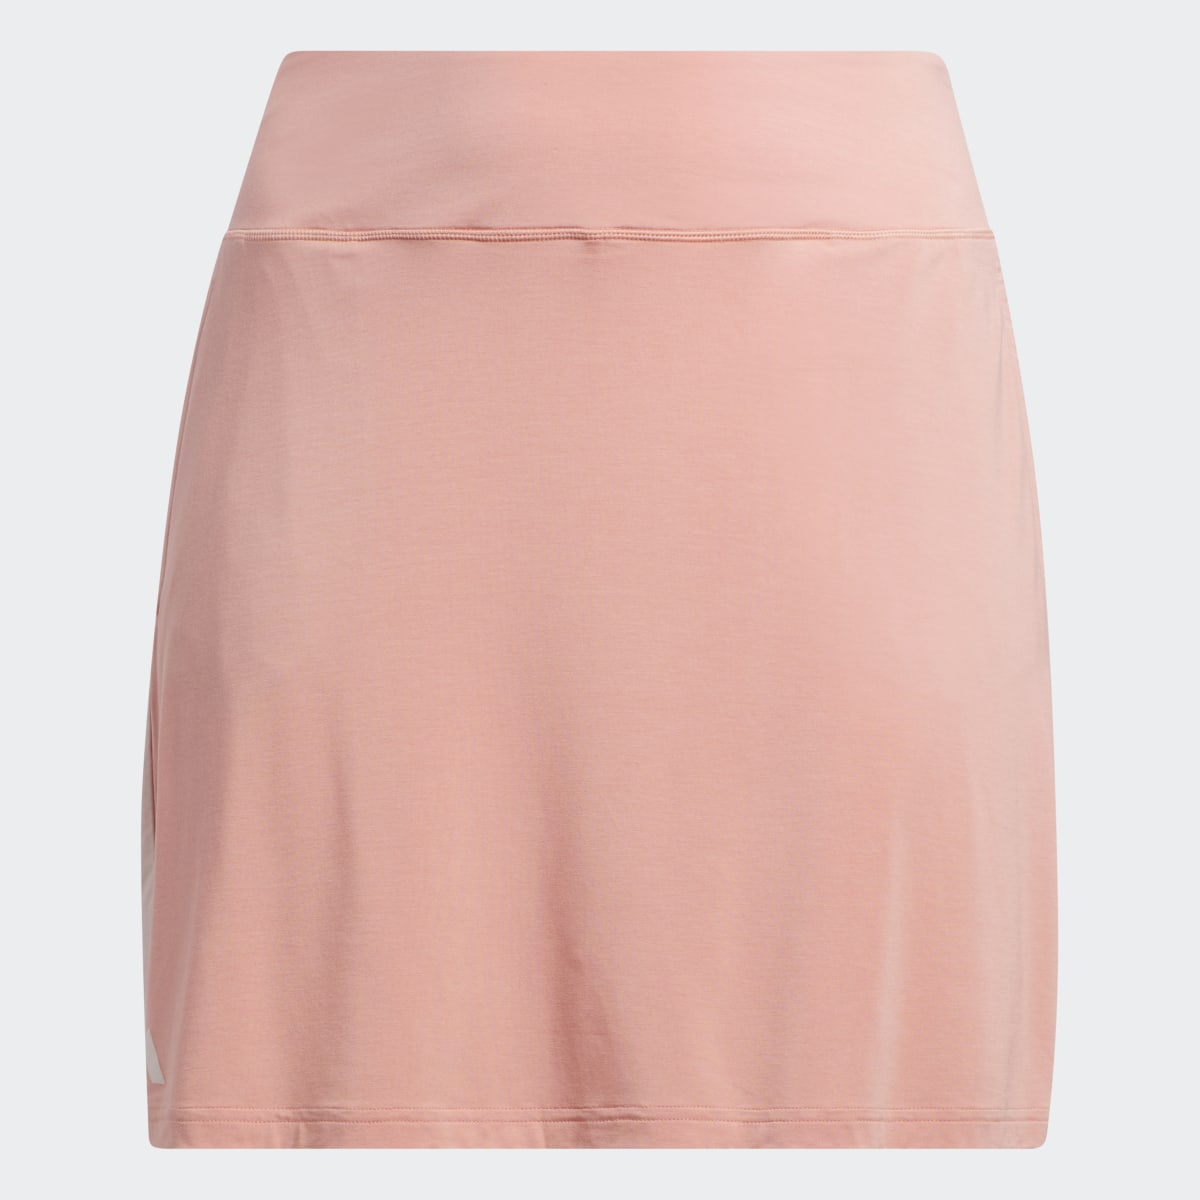 Adidas Made With Nature Golf Skirt (Plus Size). 4